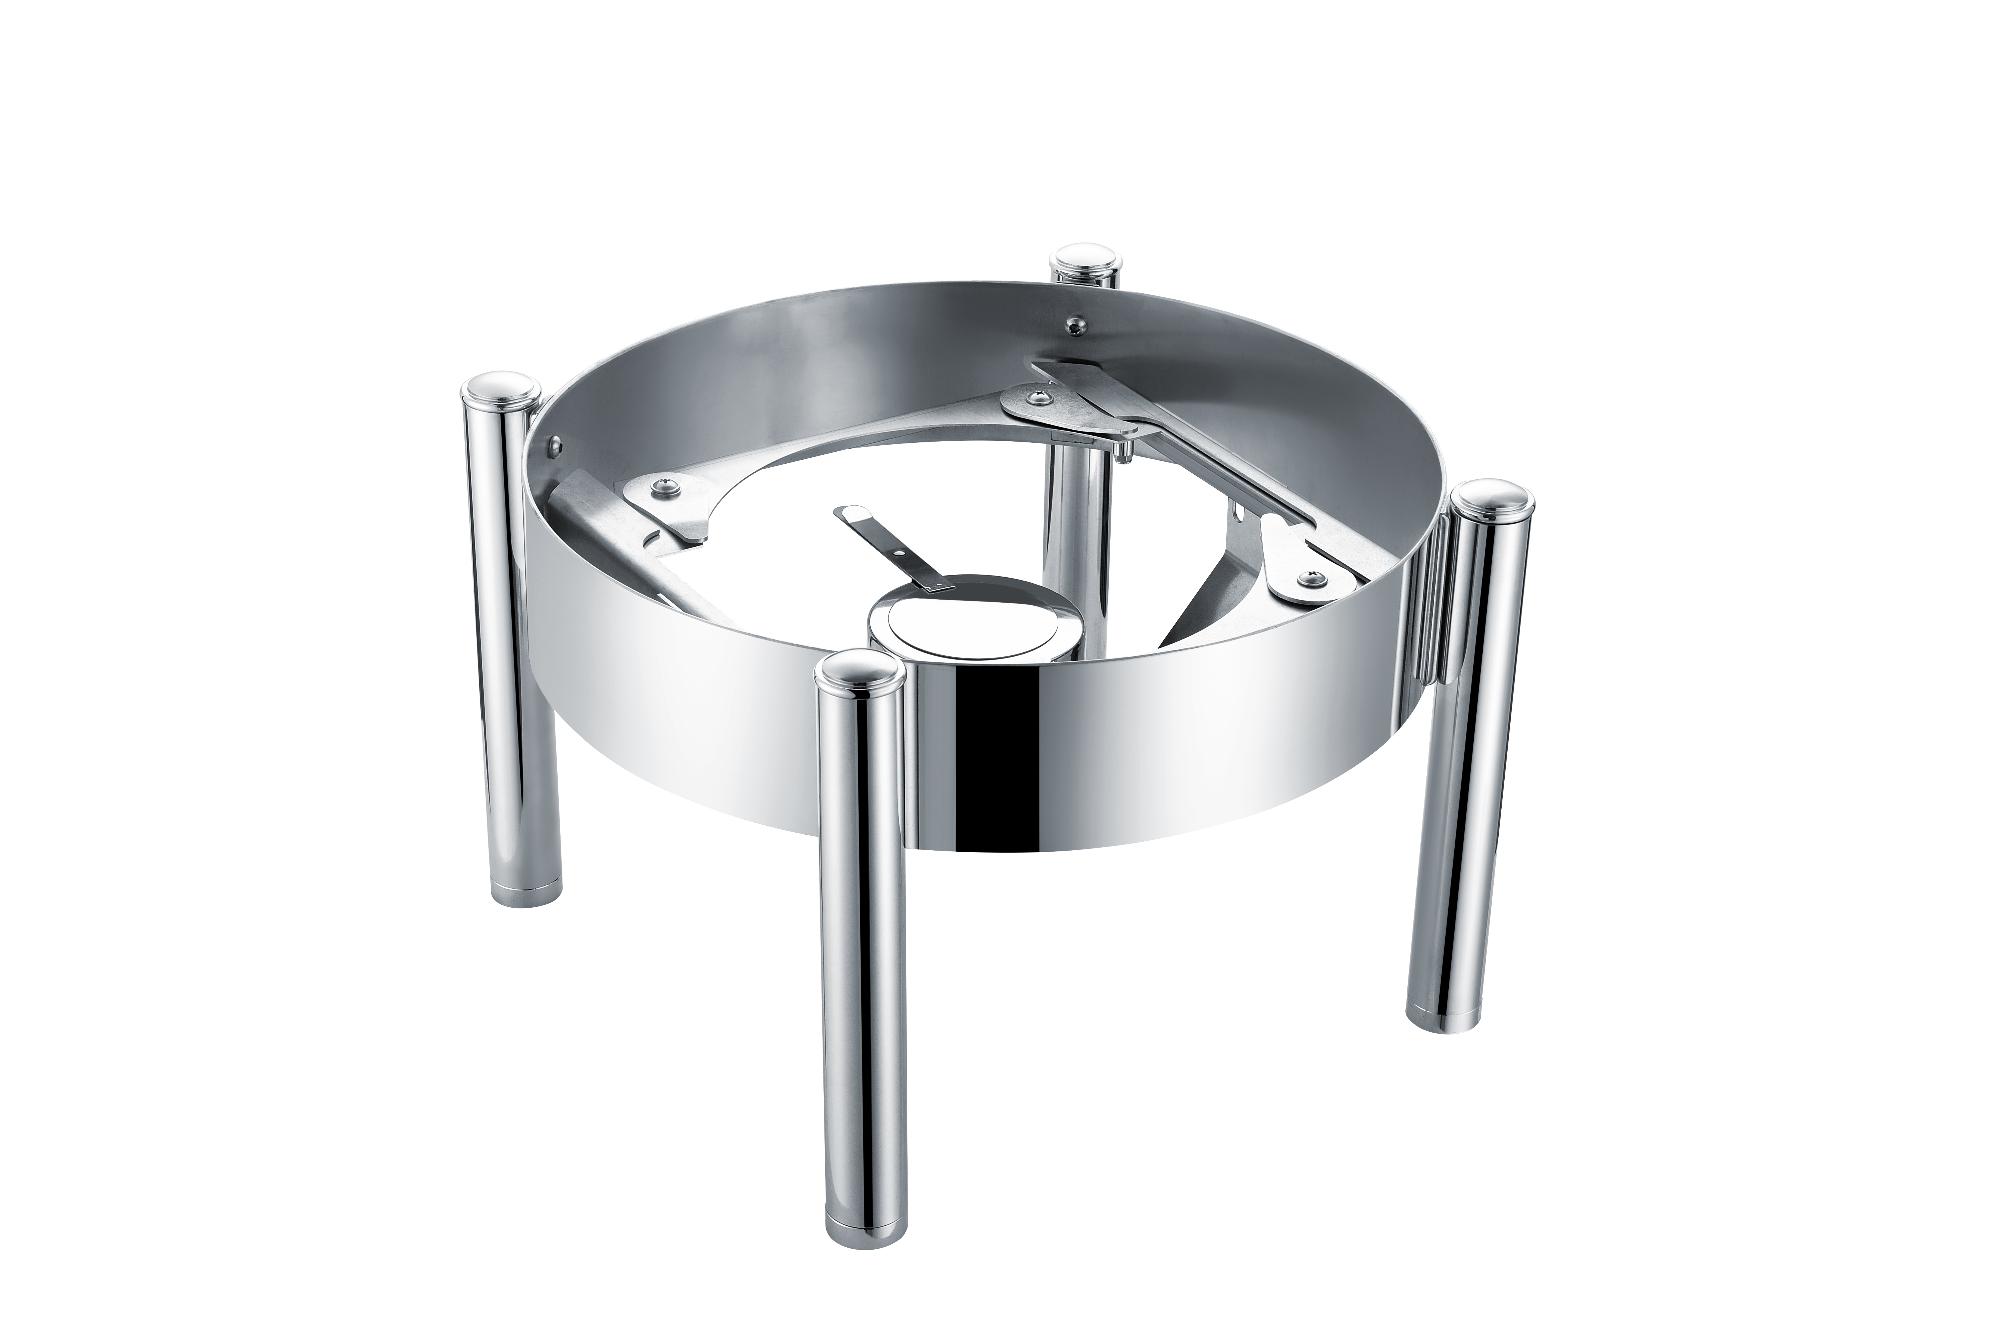 De Luxe Eco frame for deep chafing dish